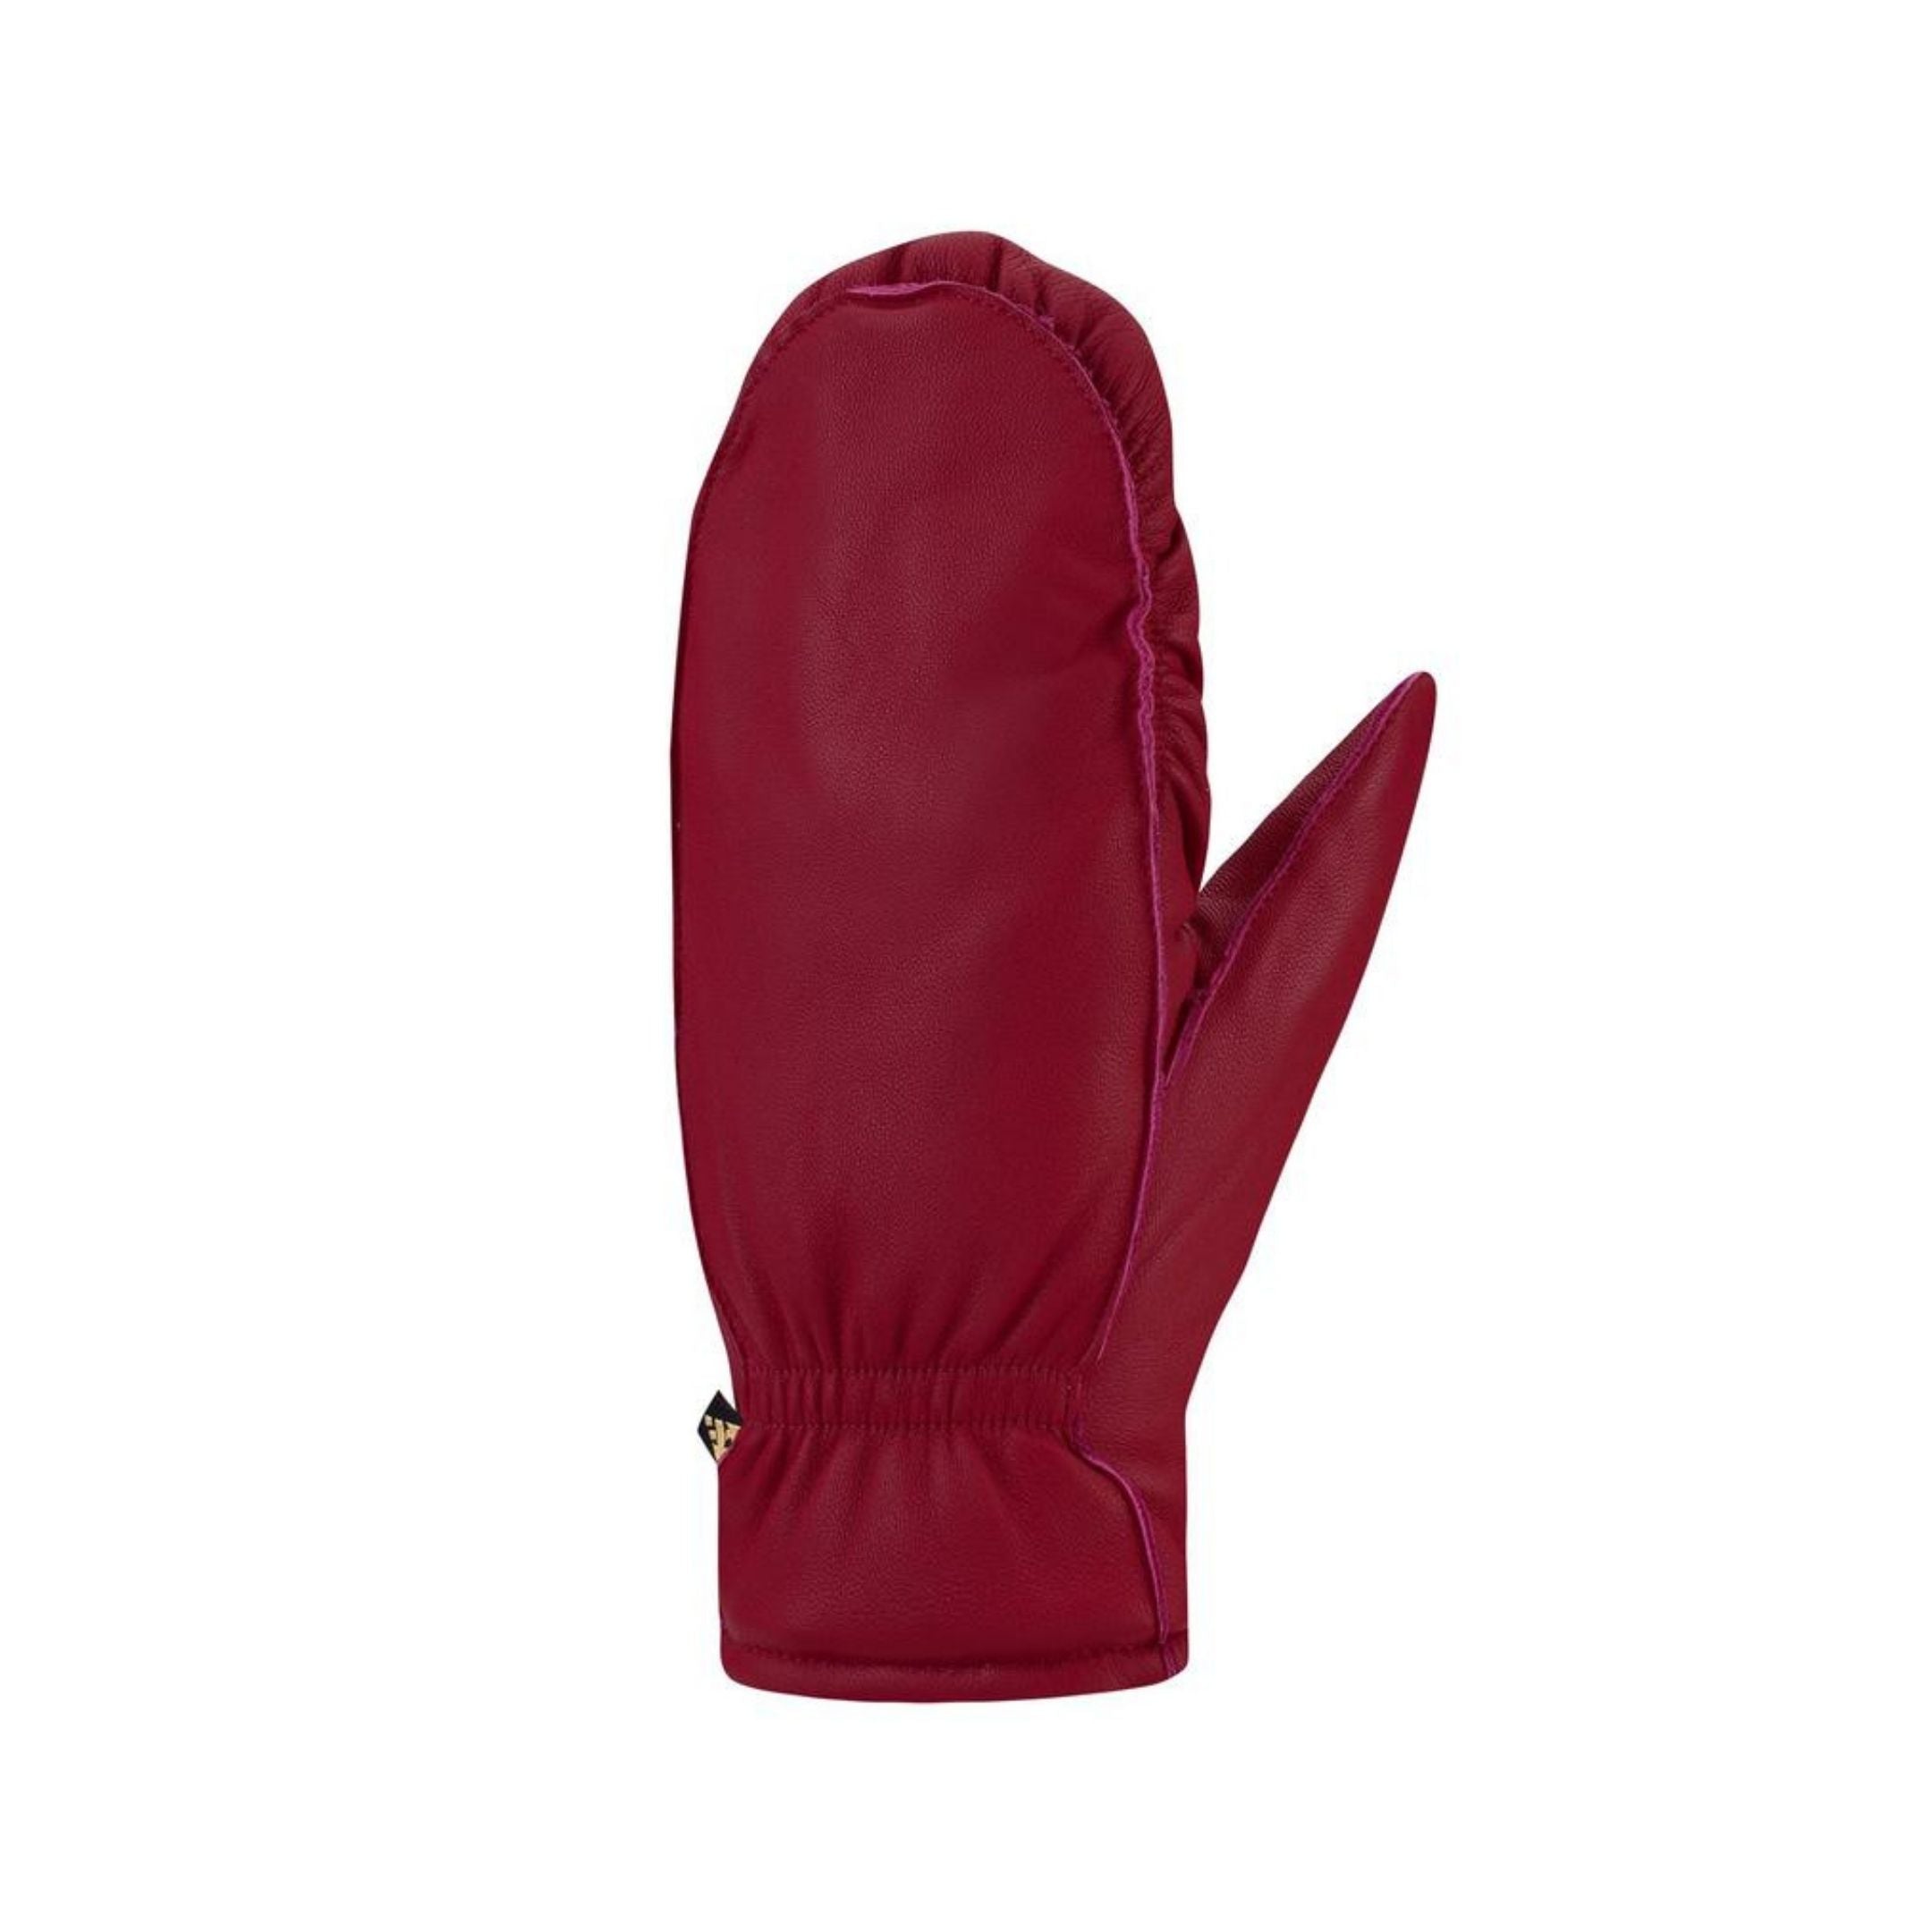 Top view of cranberry red leather mittens. 